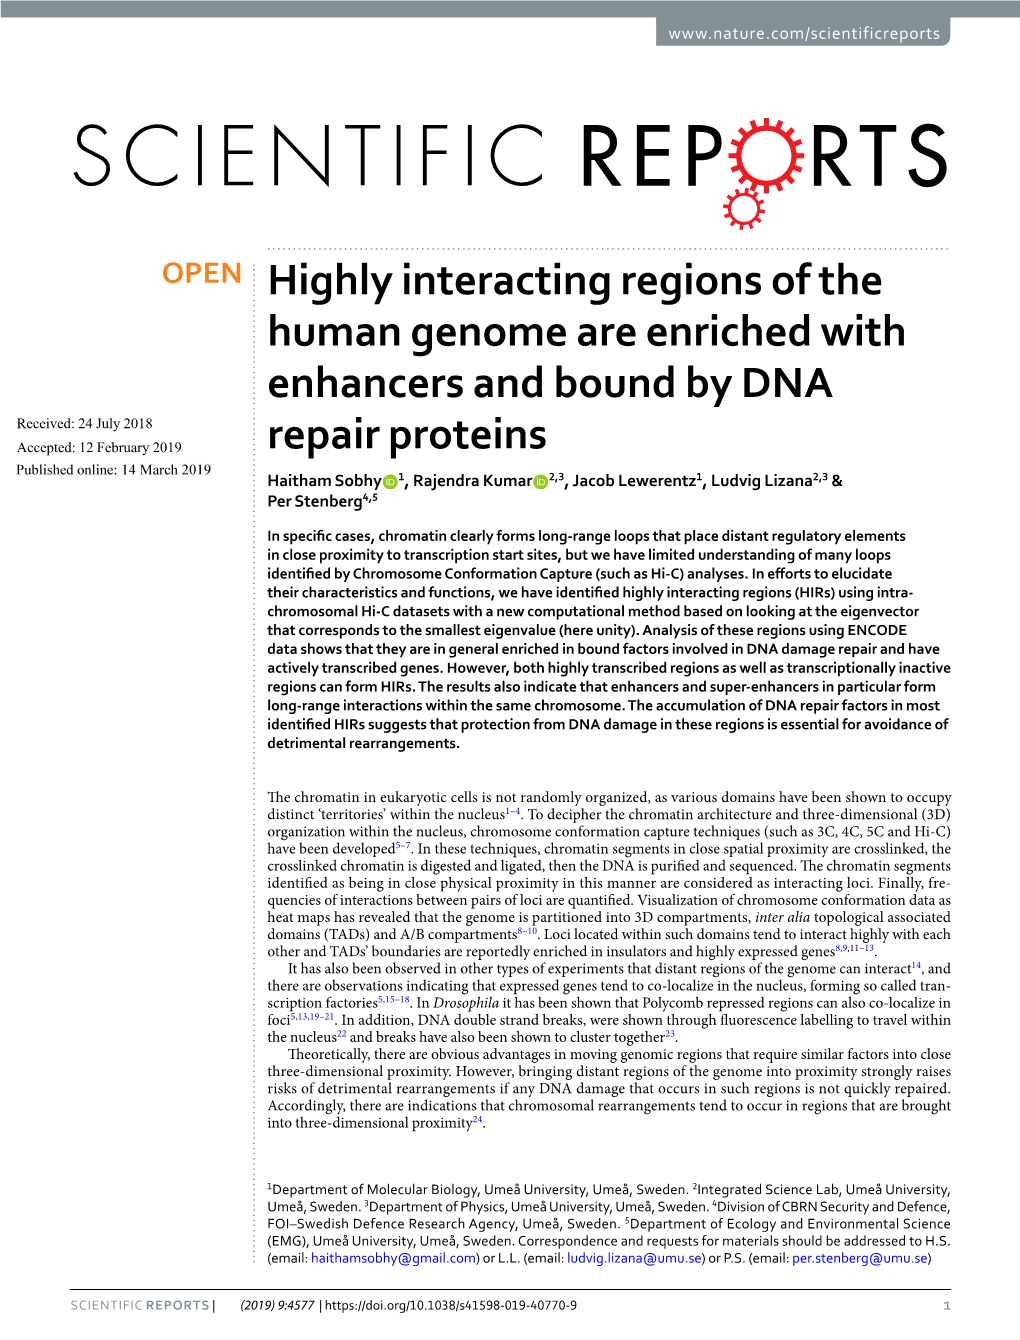 Highly Interacting Regions of the Human Genome Are Enriched With